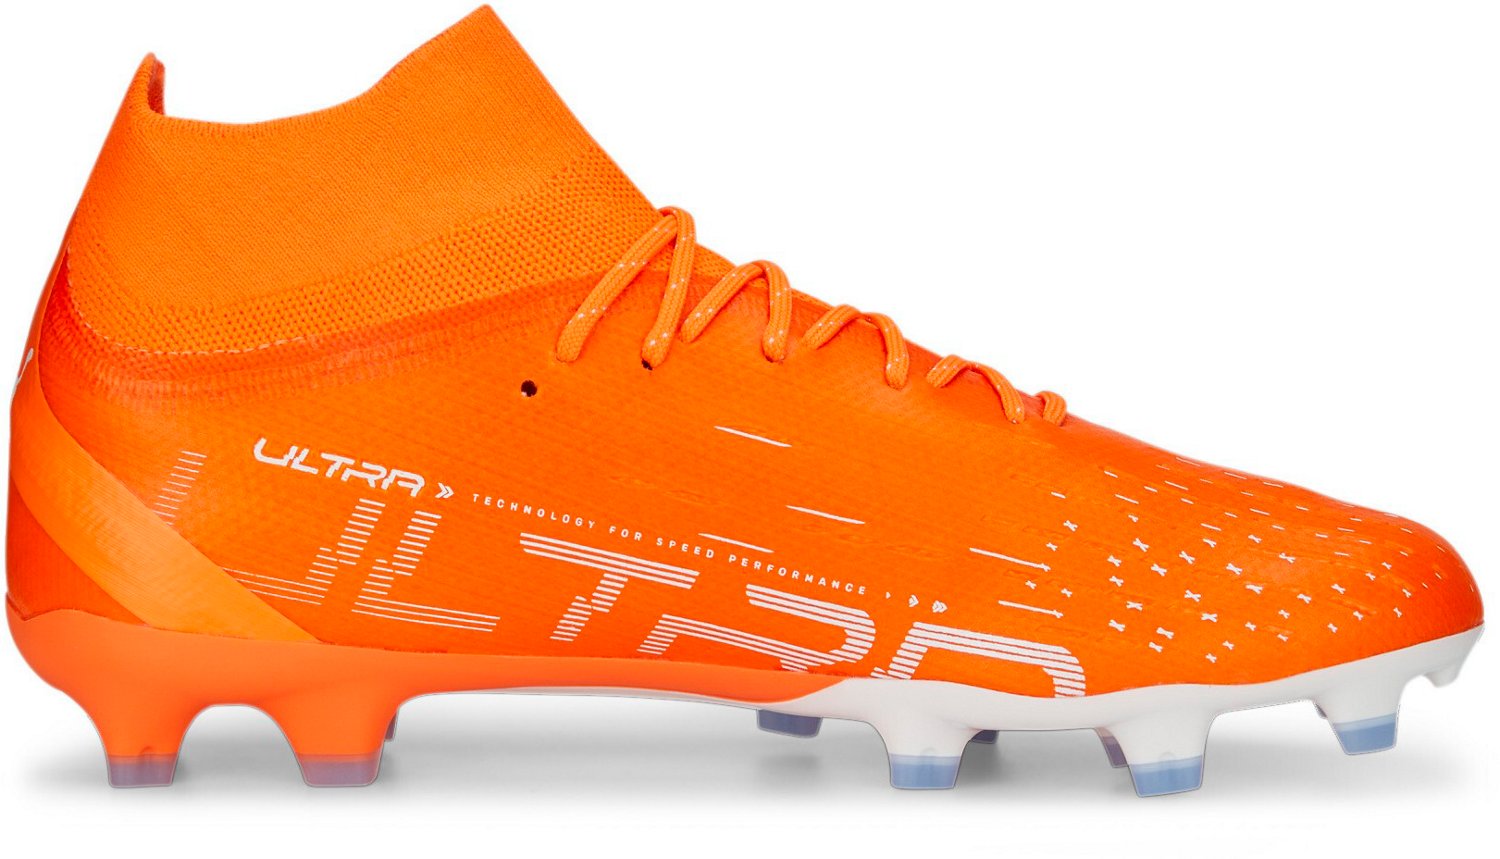 PUMA Men's Ultra Pro FG/AG Soccer Cleats                                                                                         - view number 2